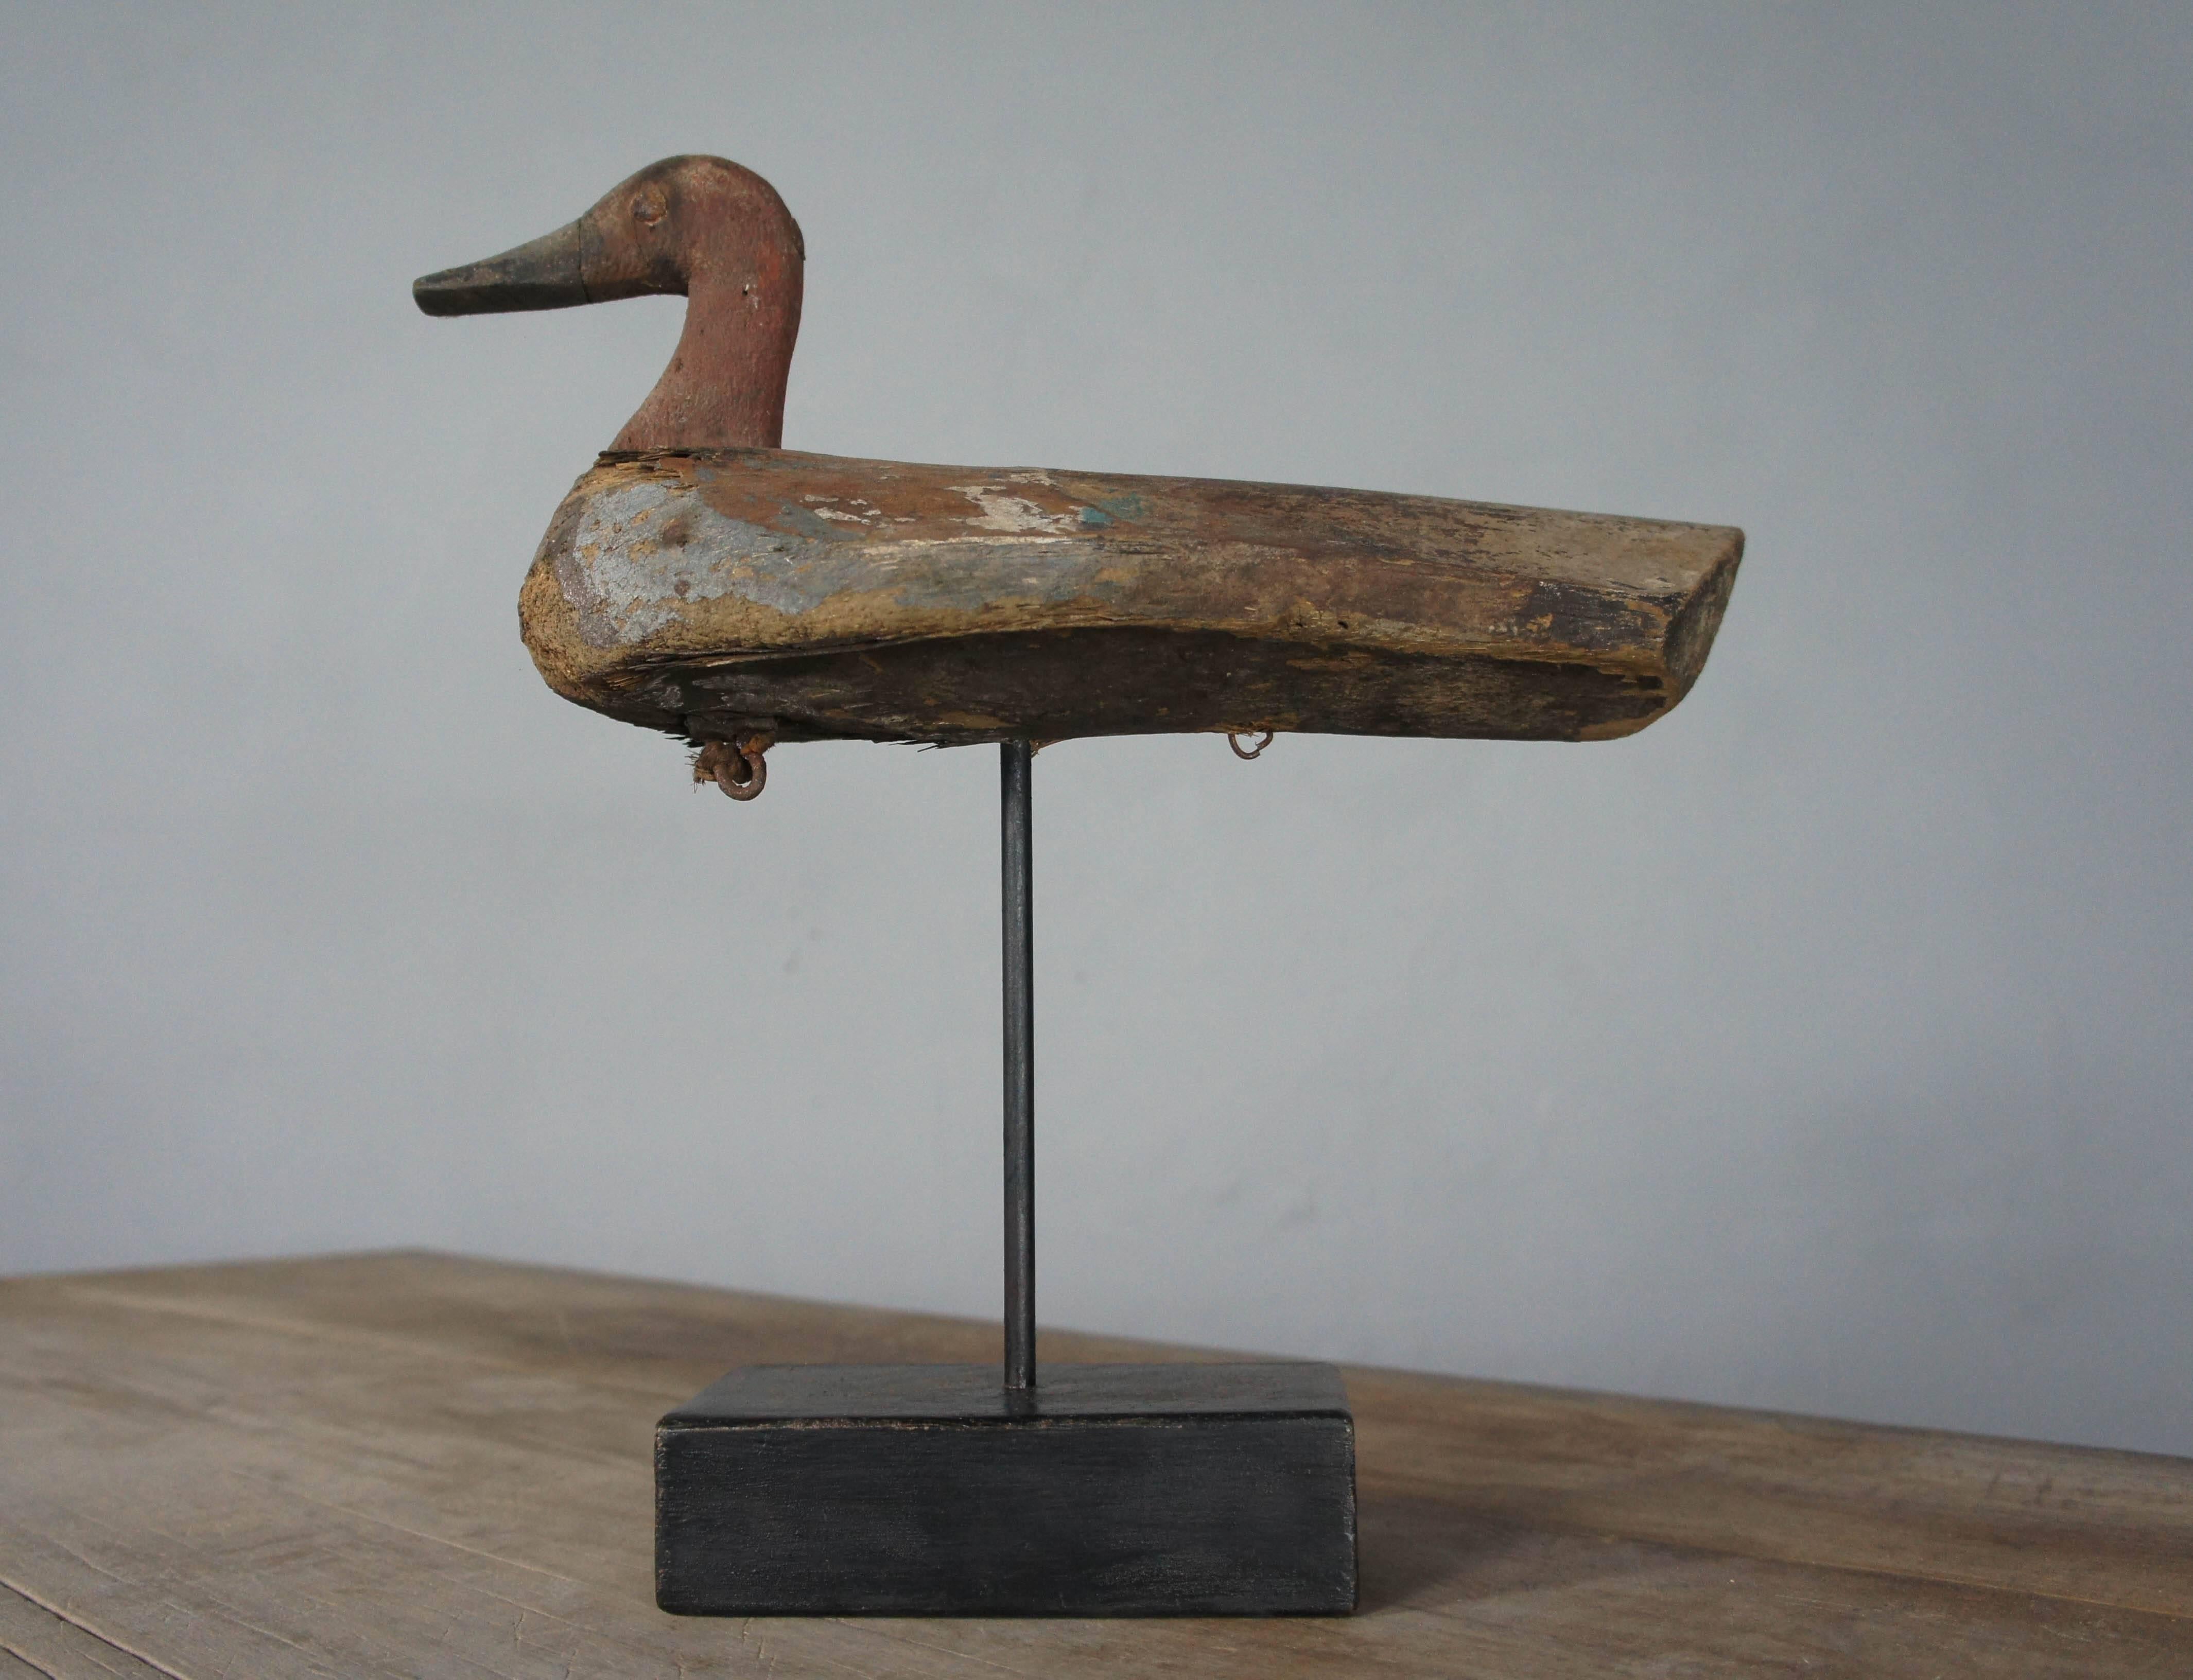 Pretty decoy duck in original paint, which has been mounted on a stand for decorative purposes. It is made from balsa wood which was the perfect material for floating decoys. A few losses consistent with age and use, great chippy paint.